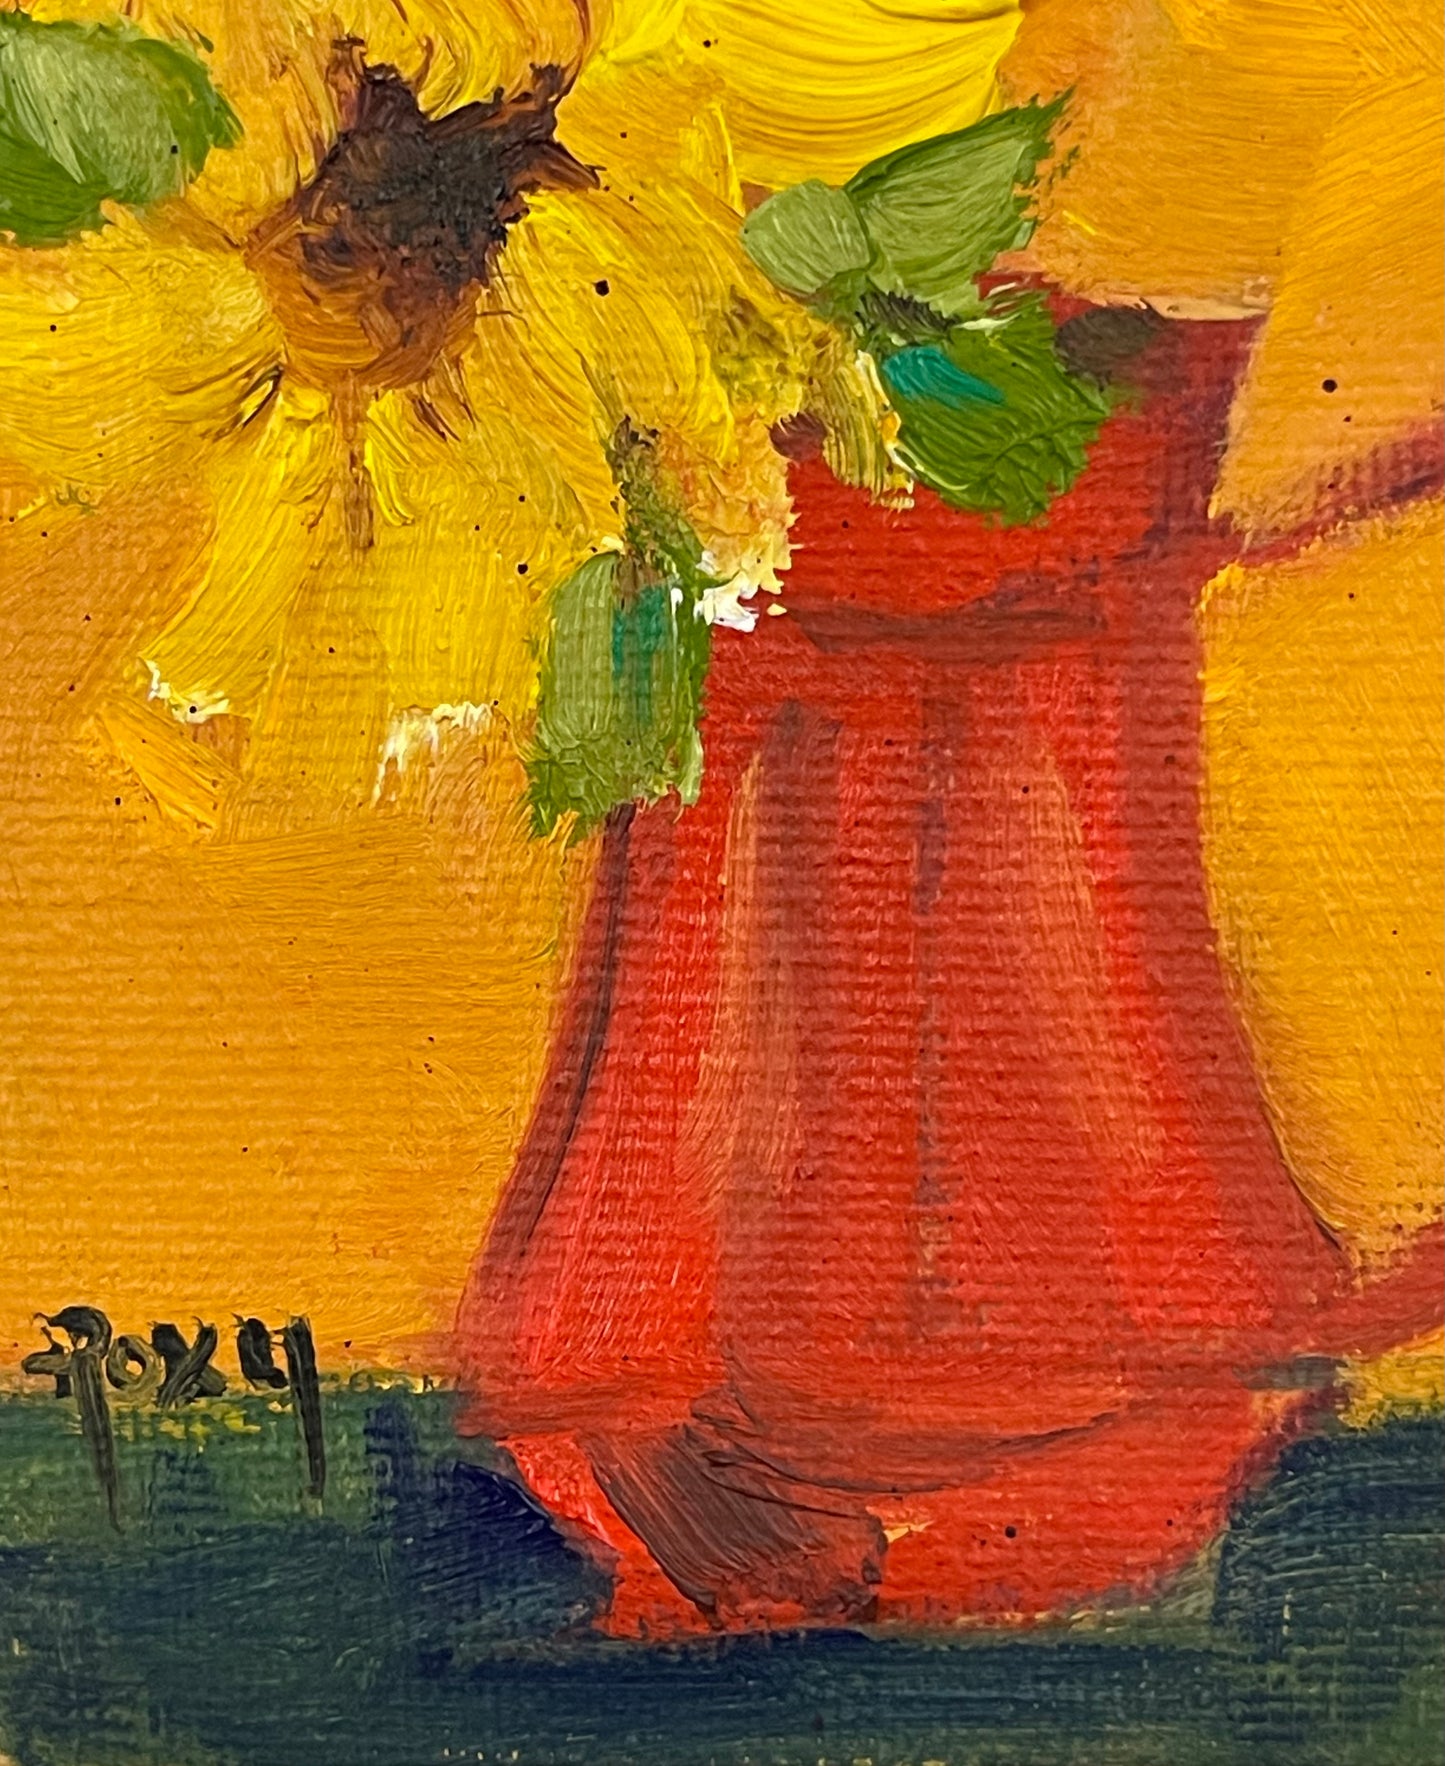 Cheerful Sunflower in a Red Pitcher-Original Miniature Oil Painting with Stand